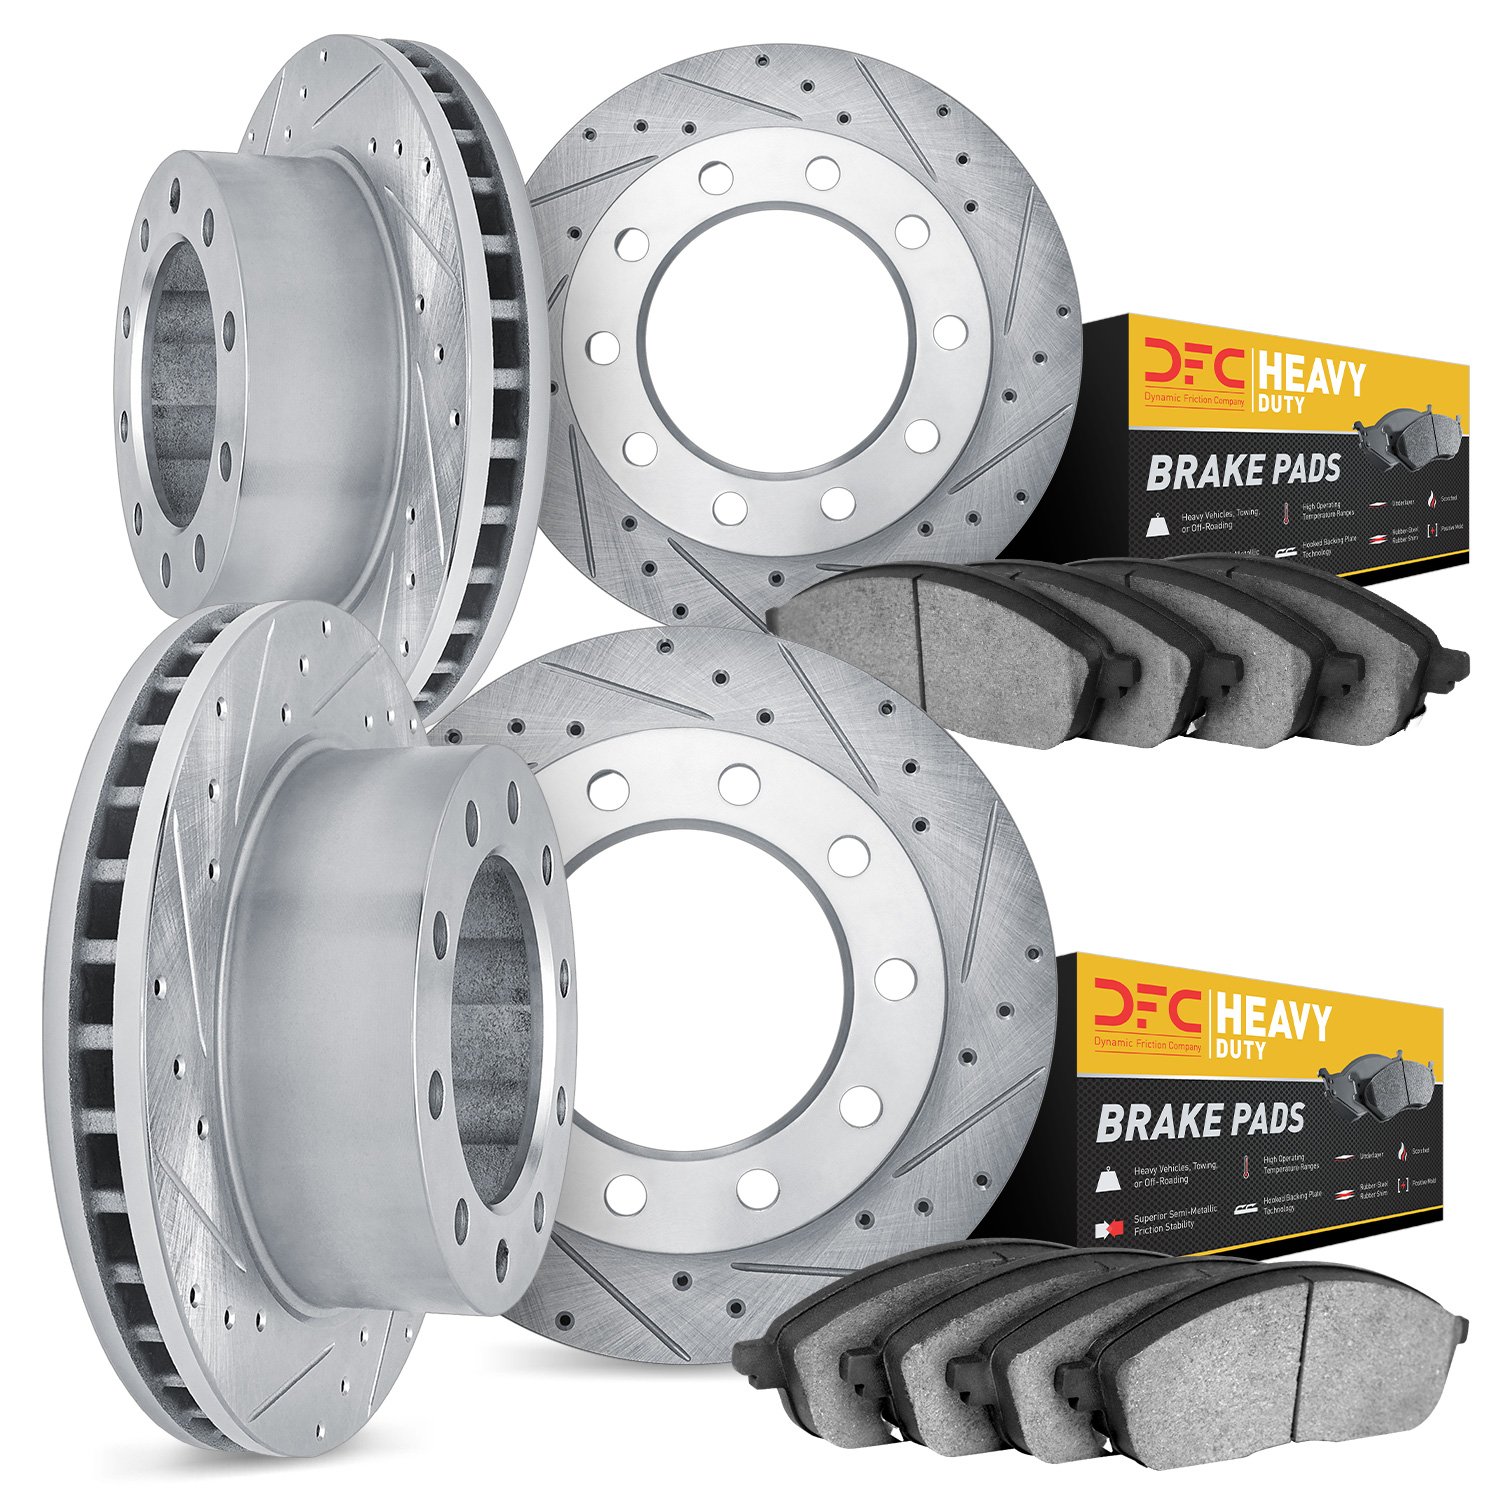 7204-99056 Drilled/Slotted Rotors w/Heavy-Duty Brake Pads Kit [Silver], 1999-2004 Ford/Lincoln/Mercury/Mazda, Position: Front an